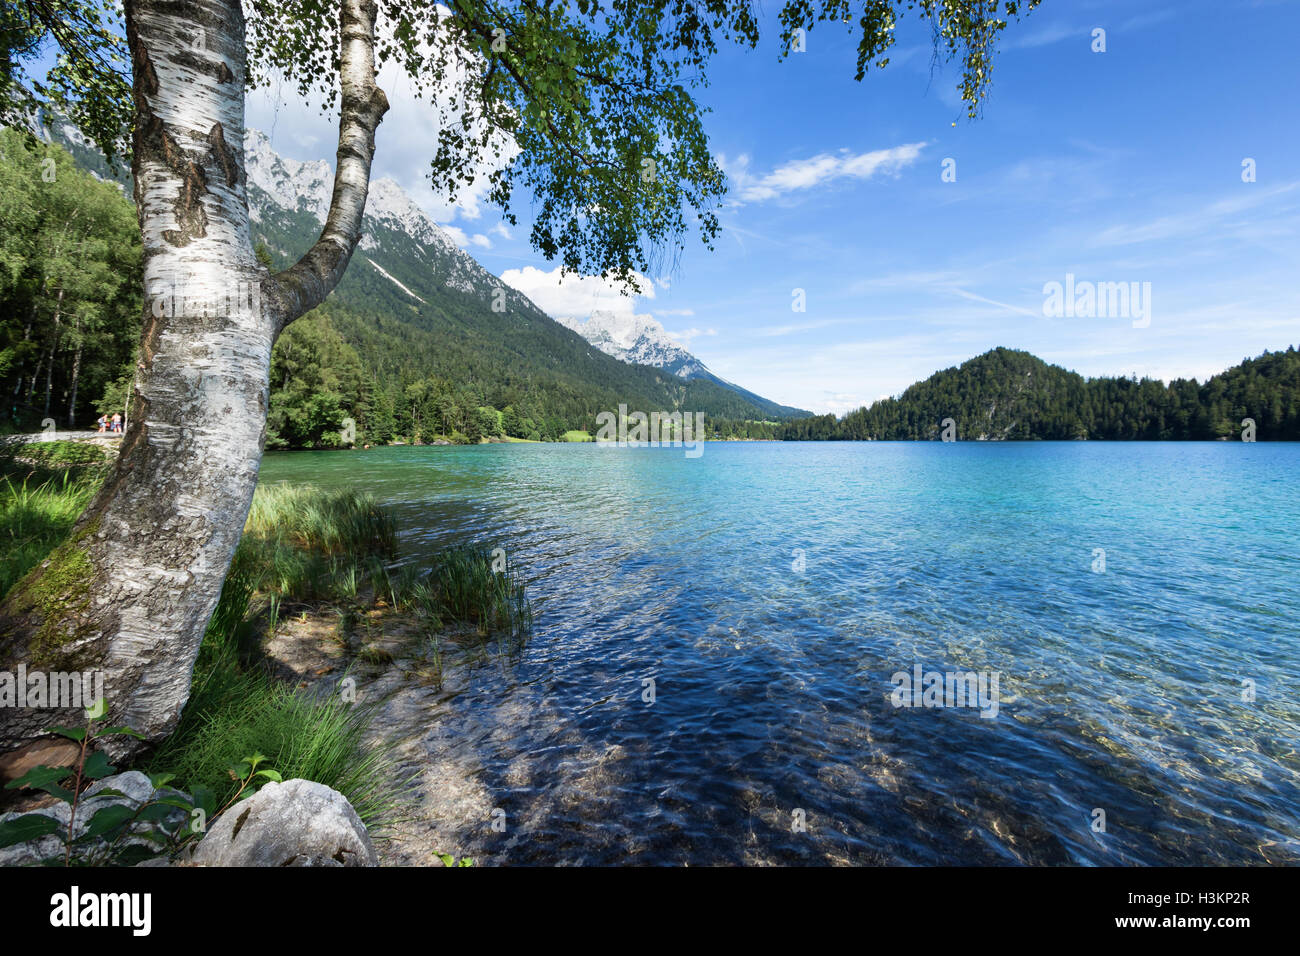 Place to relax at a mountain lake. Austria,Tyrol, Hintersteiner Lake Stock Photo